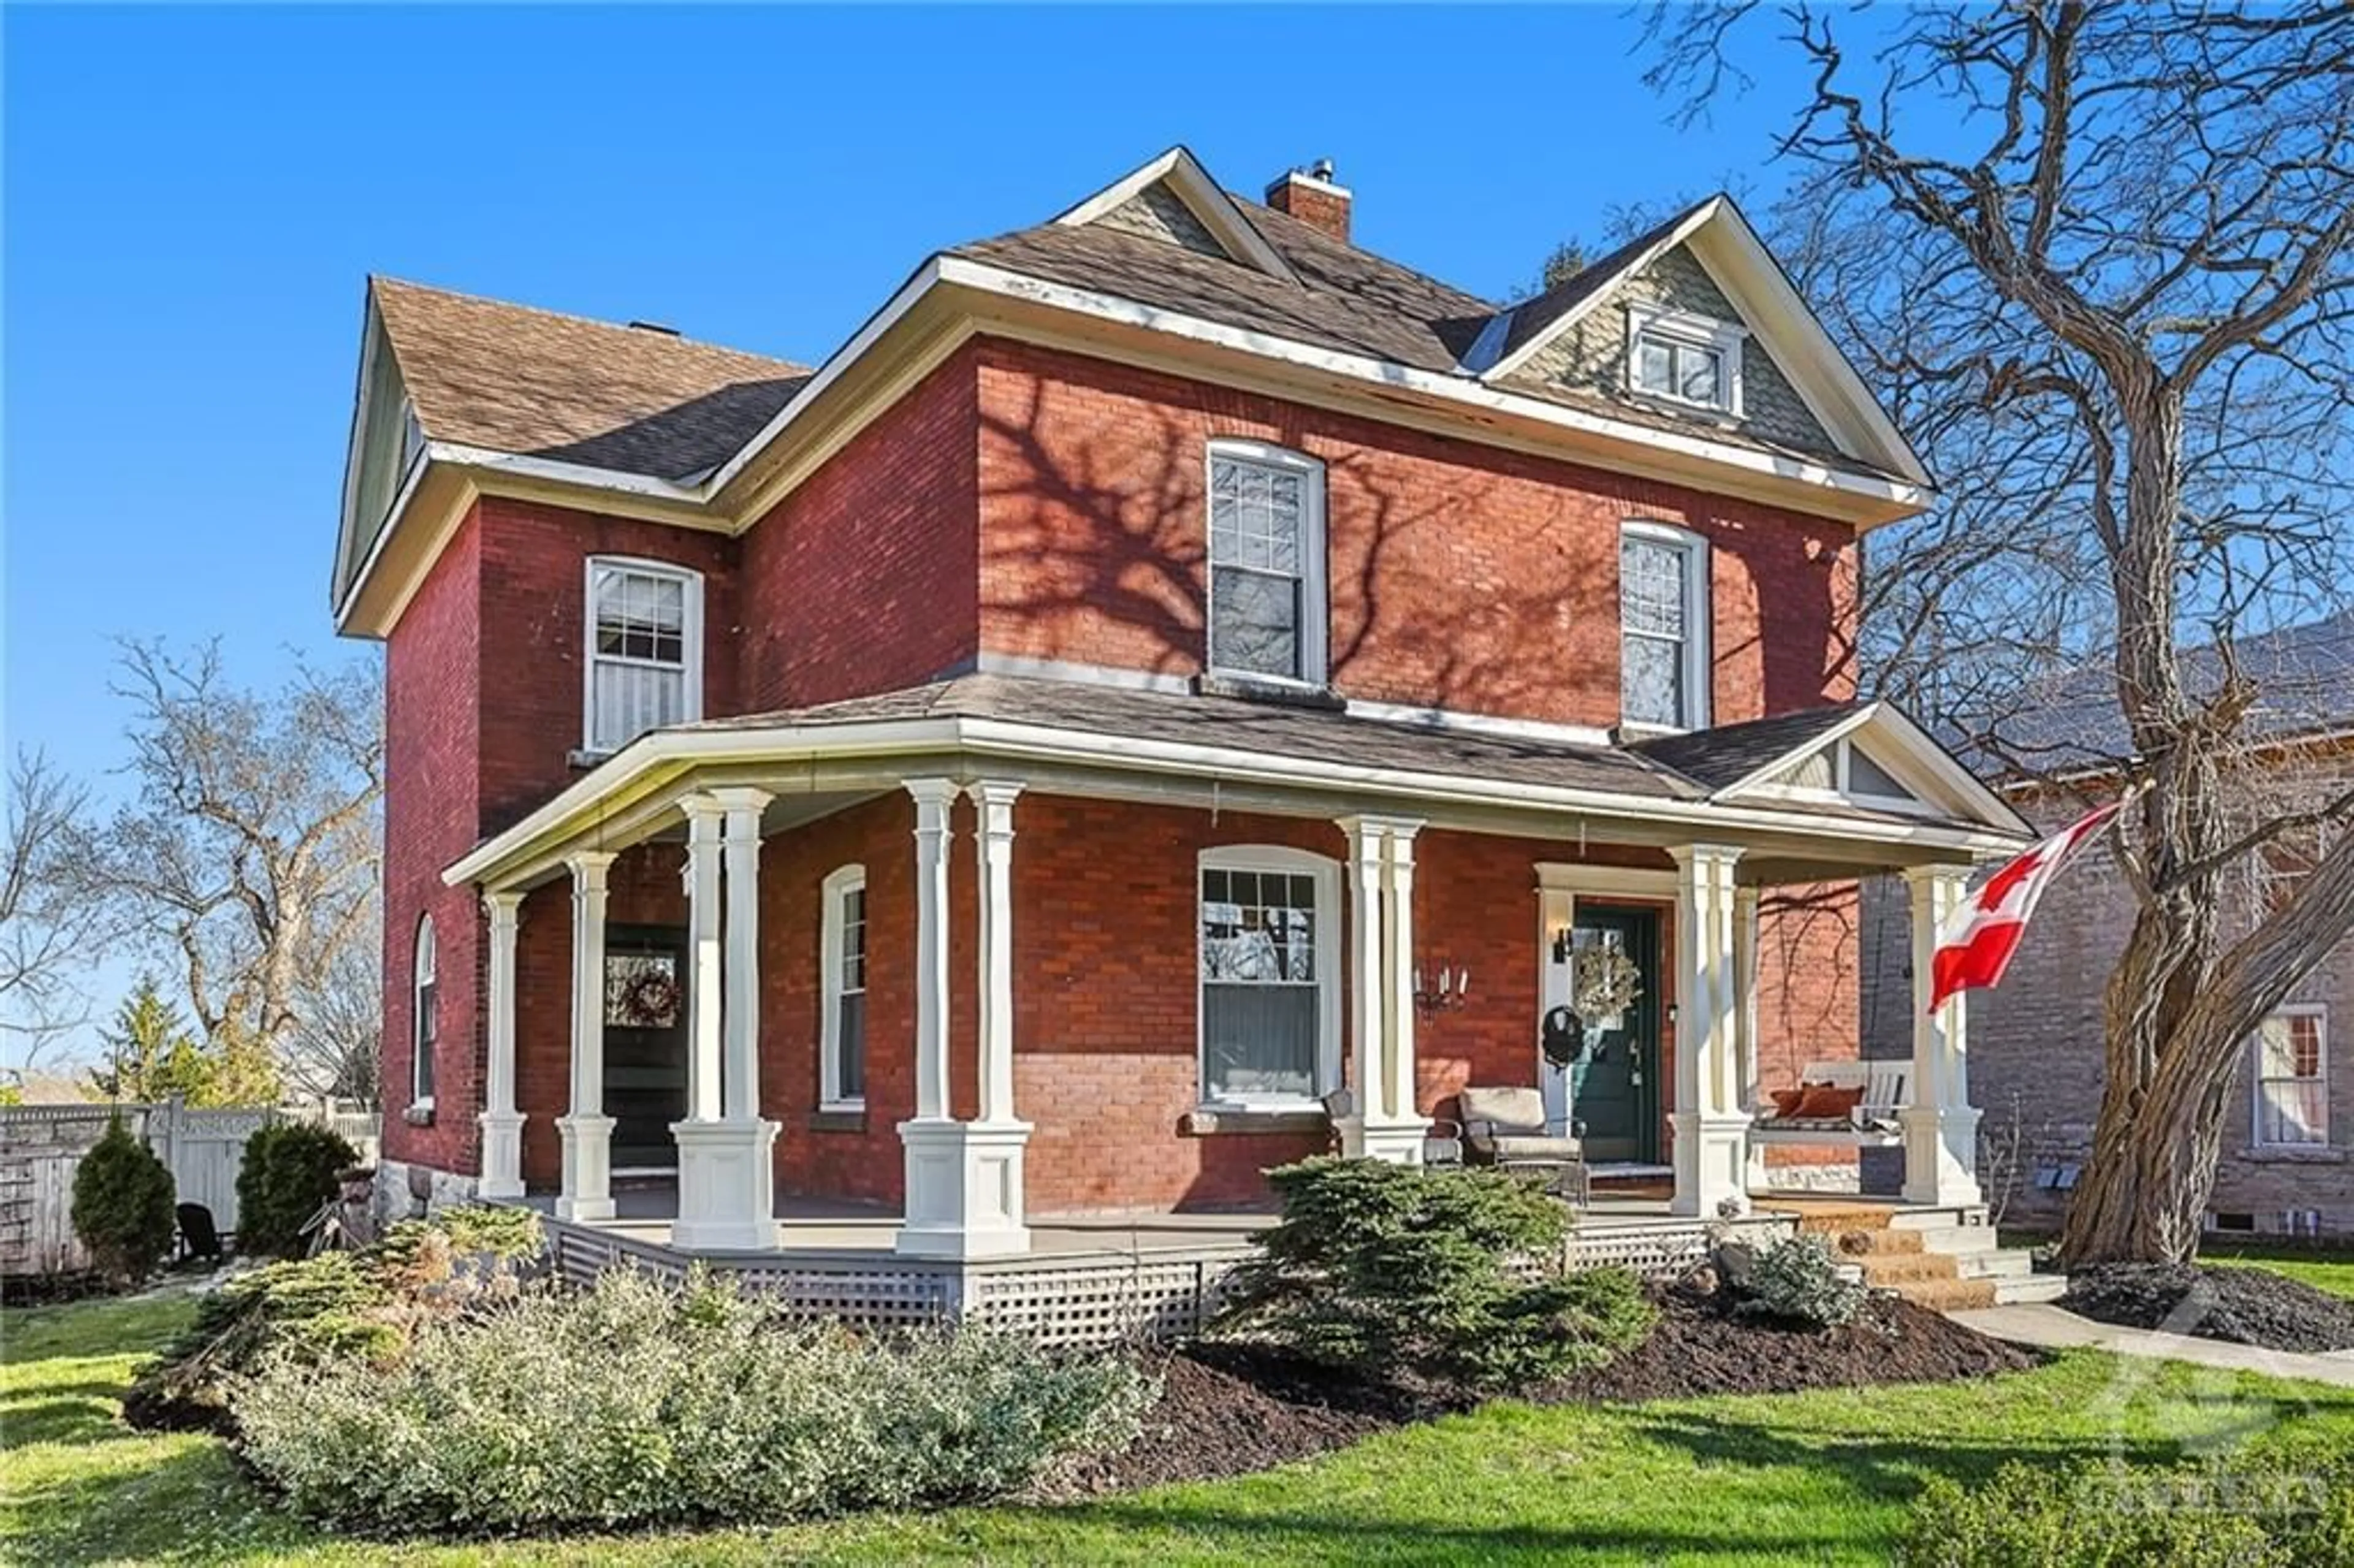 Home with brick exterior material for 57 MAIN St, Almonte Ontario K0A 1A0